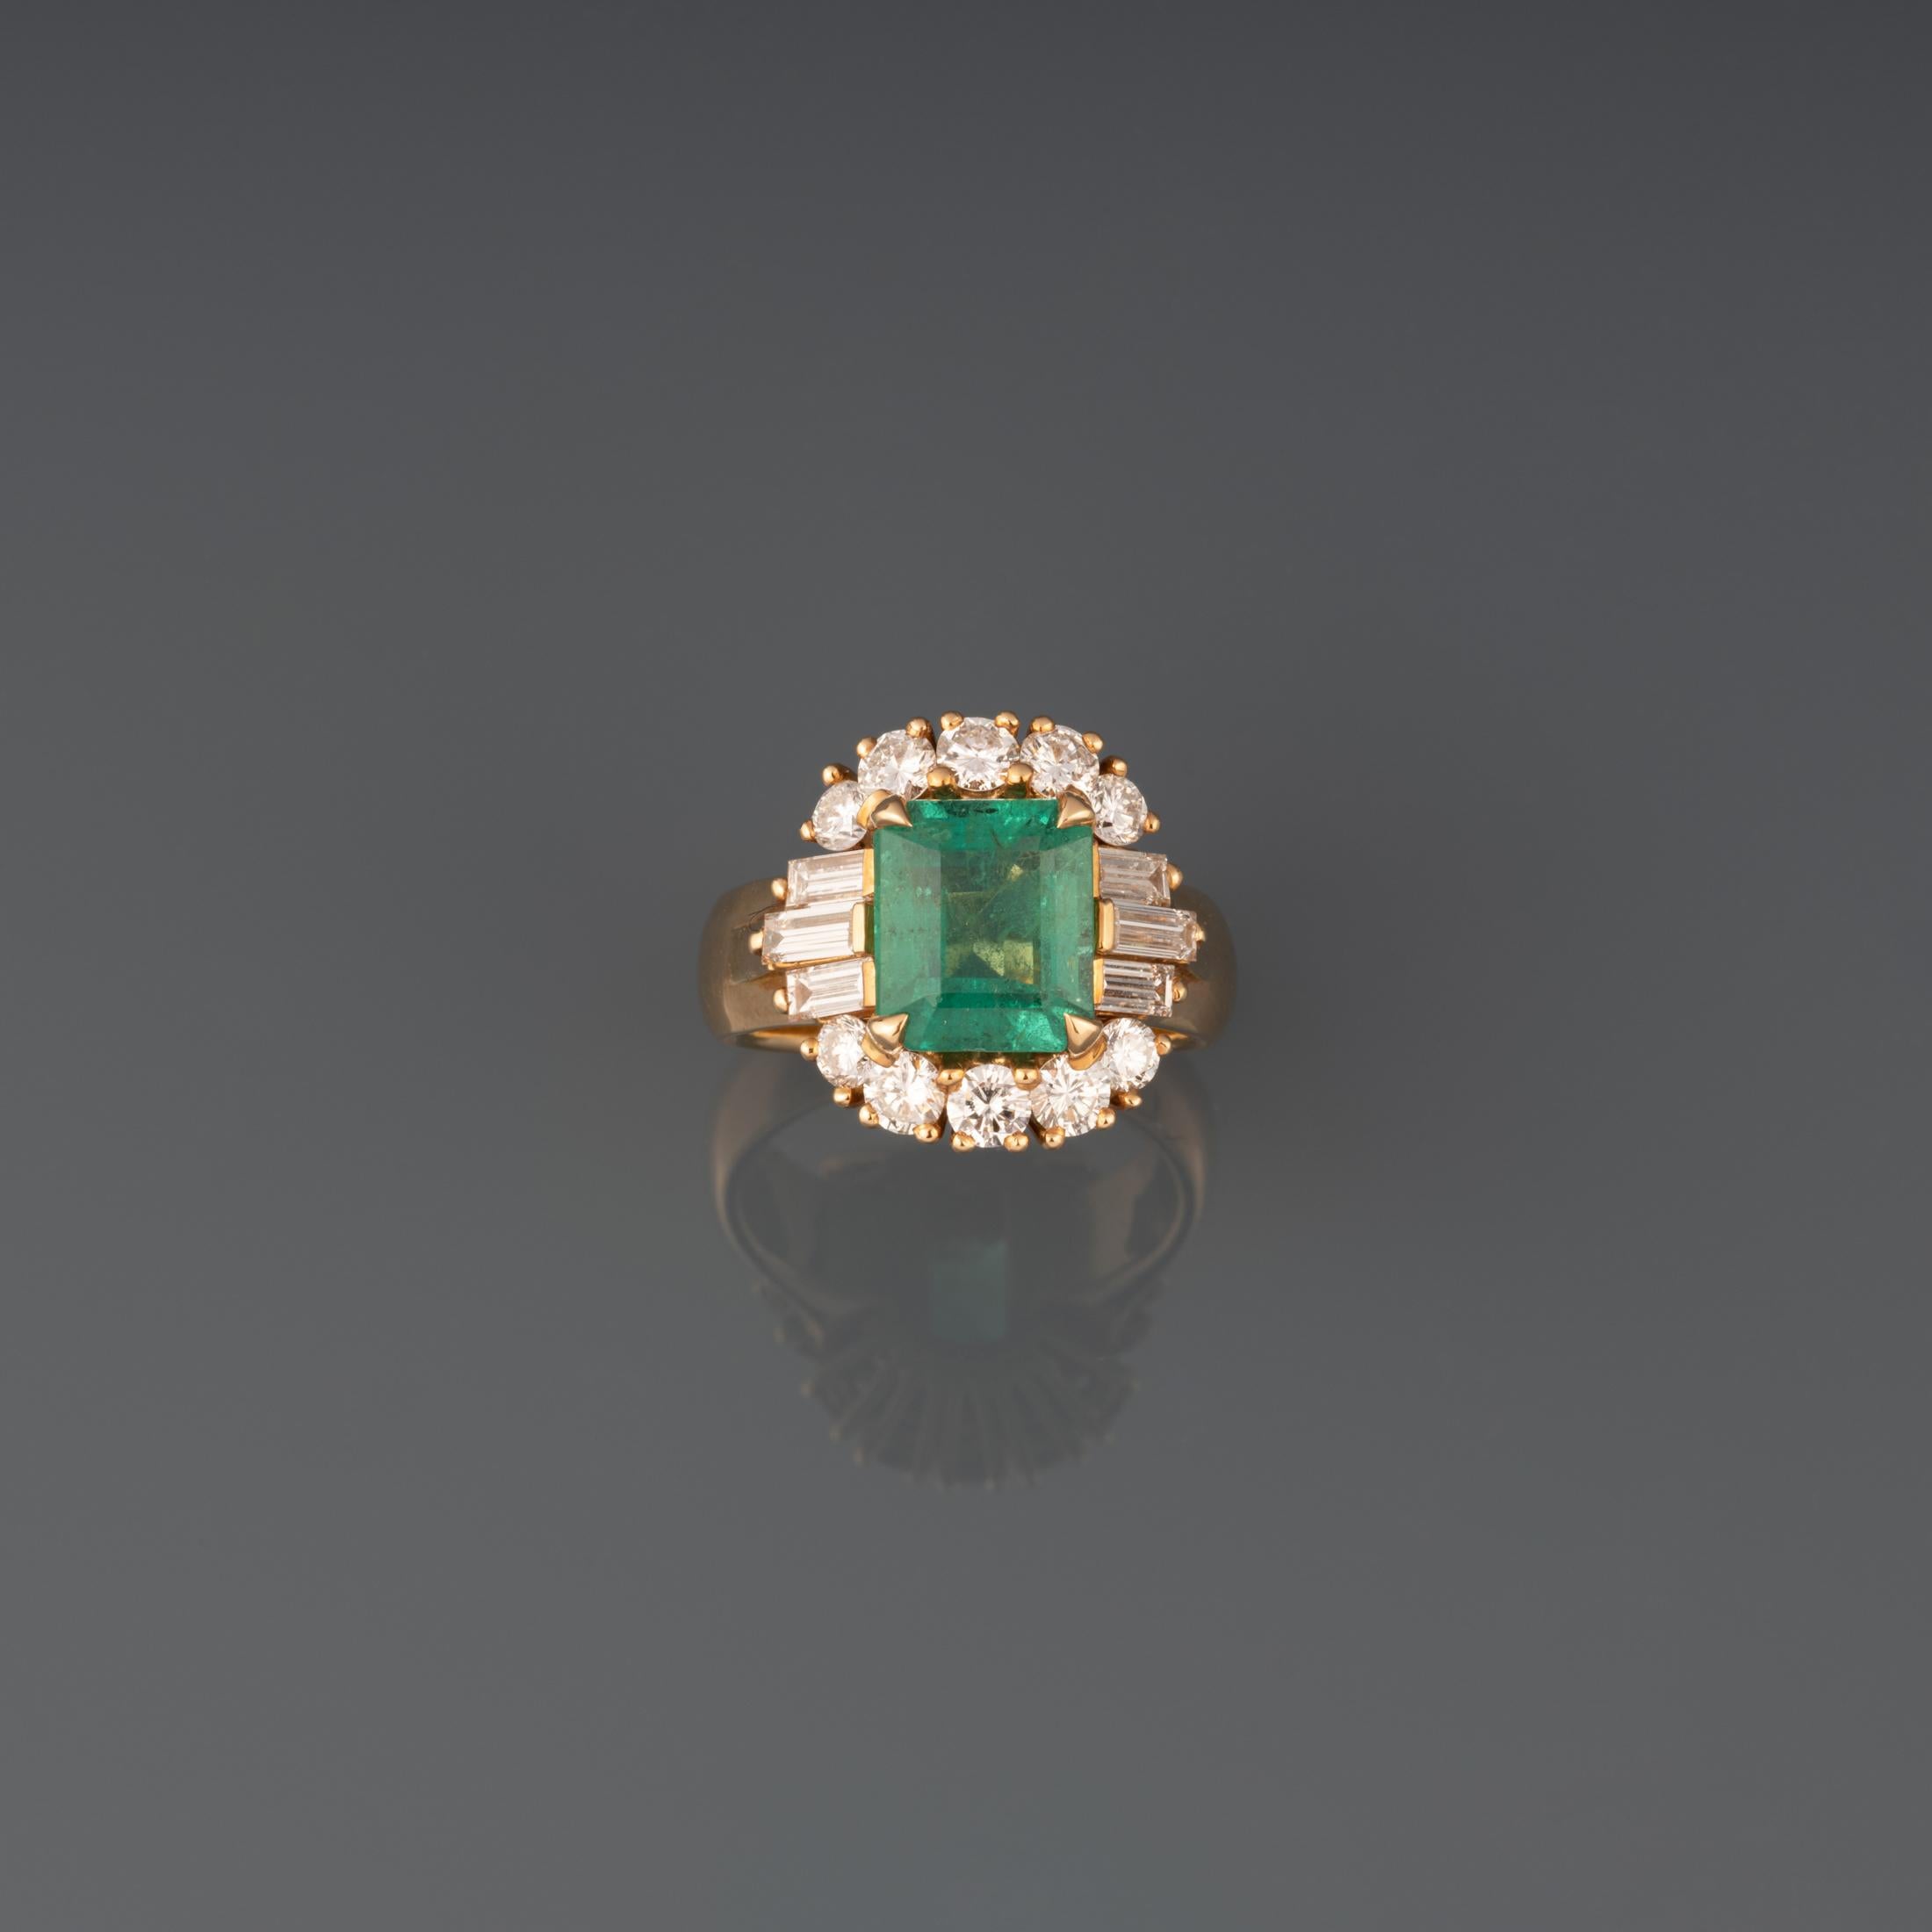 A beautiful ring, made by great house Mouawad. 

Made in yellow gold 18k, set with quality diamonds and a beautiful emerald certified from Zambia. The diamonds weights 1.20 carats approximately.

The emerald has a good clarity and weights 3.58